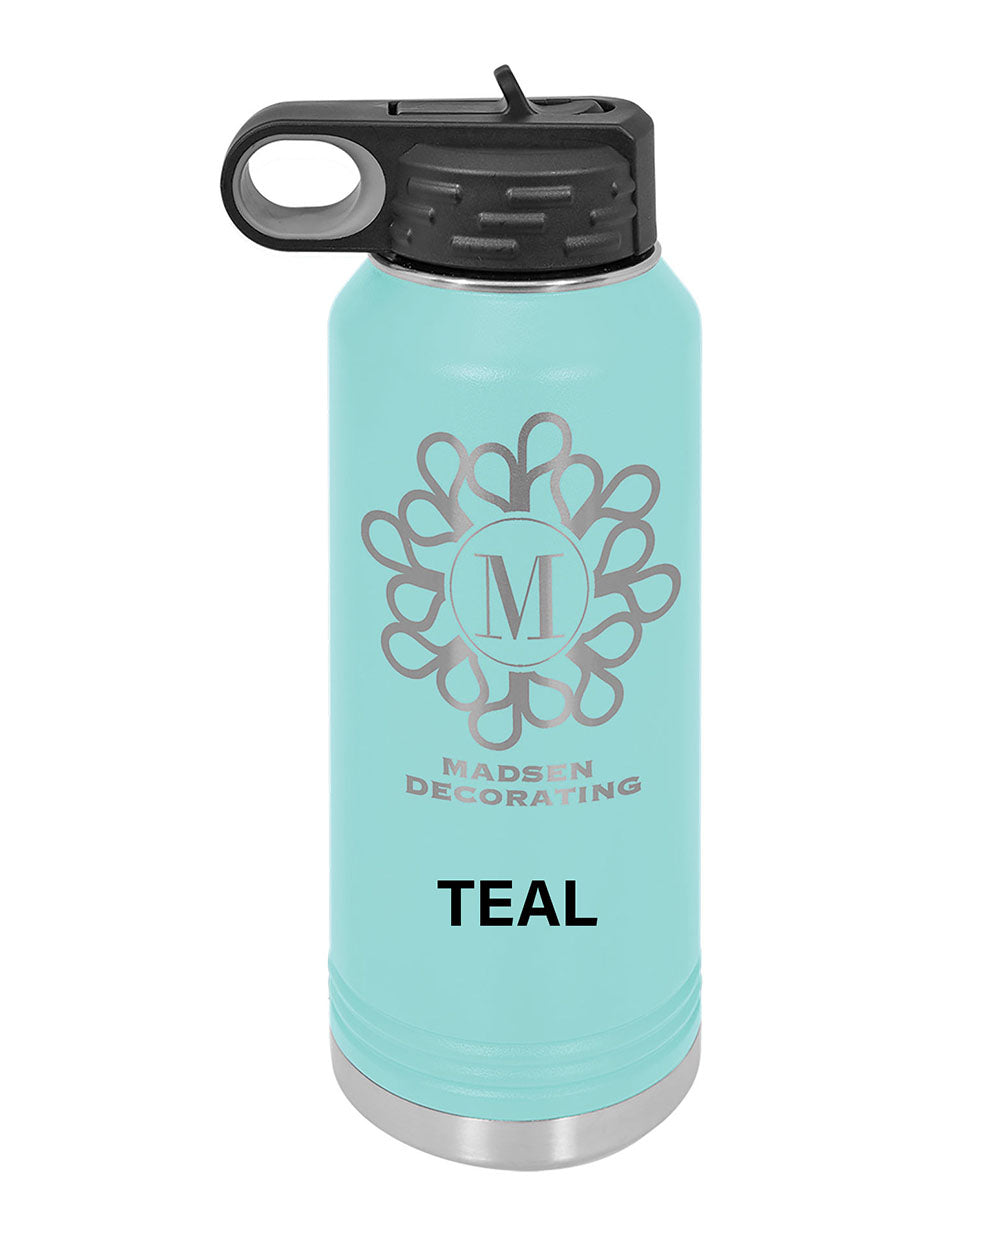 40oz Water Bottle with built-in Straw - Pick your Color - Includes Free Name Engraving - Polar 40 oz